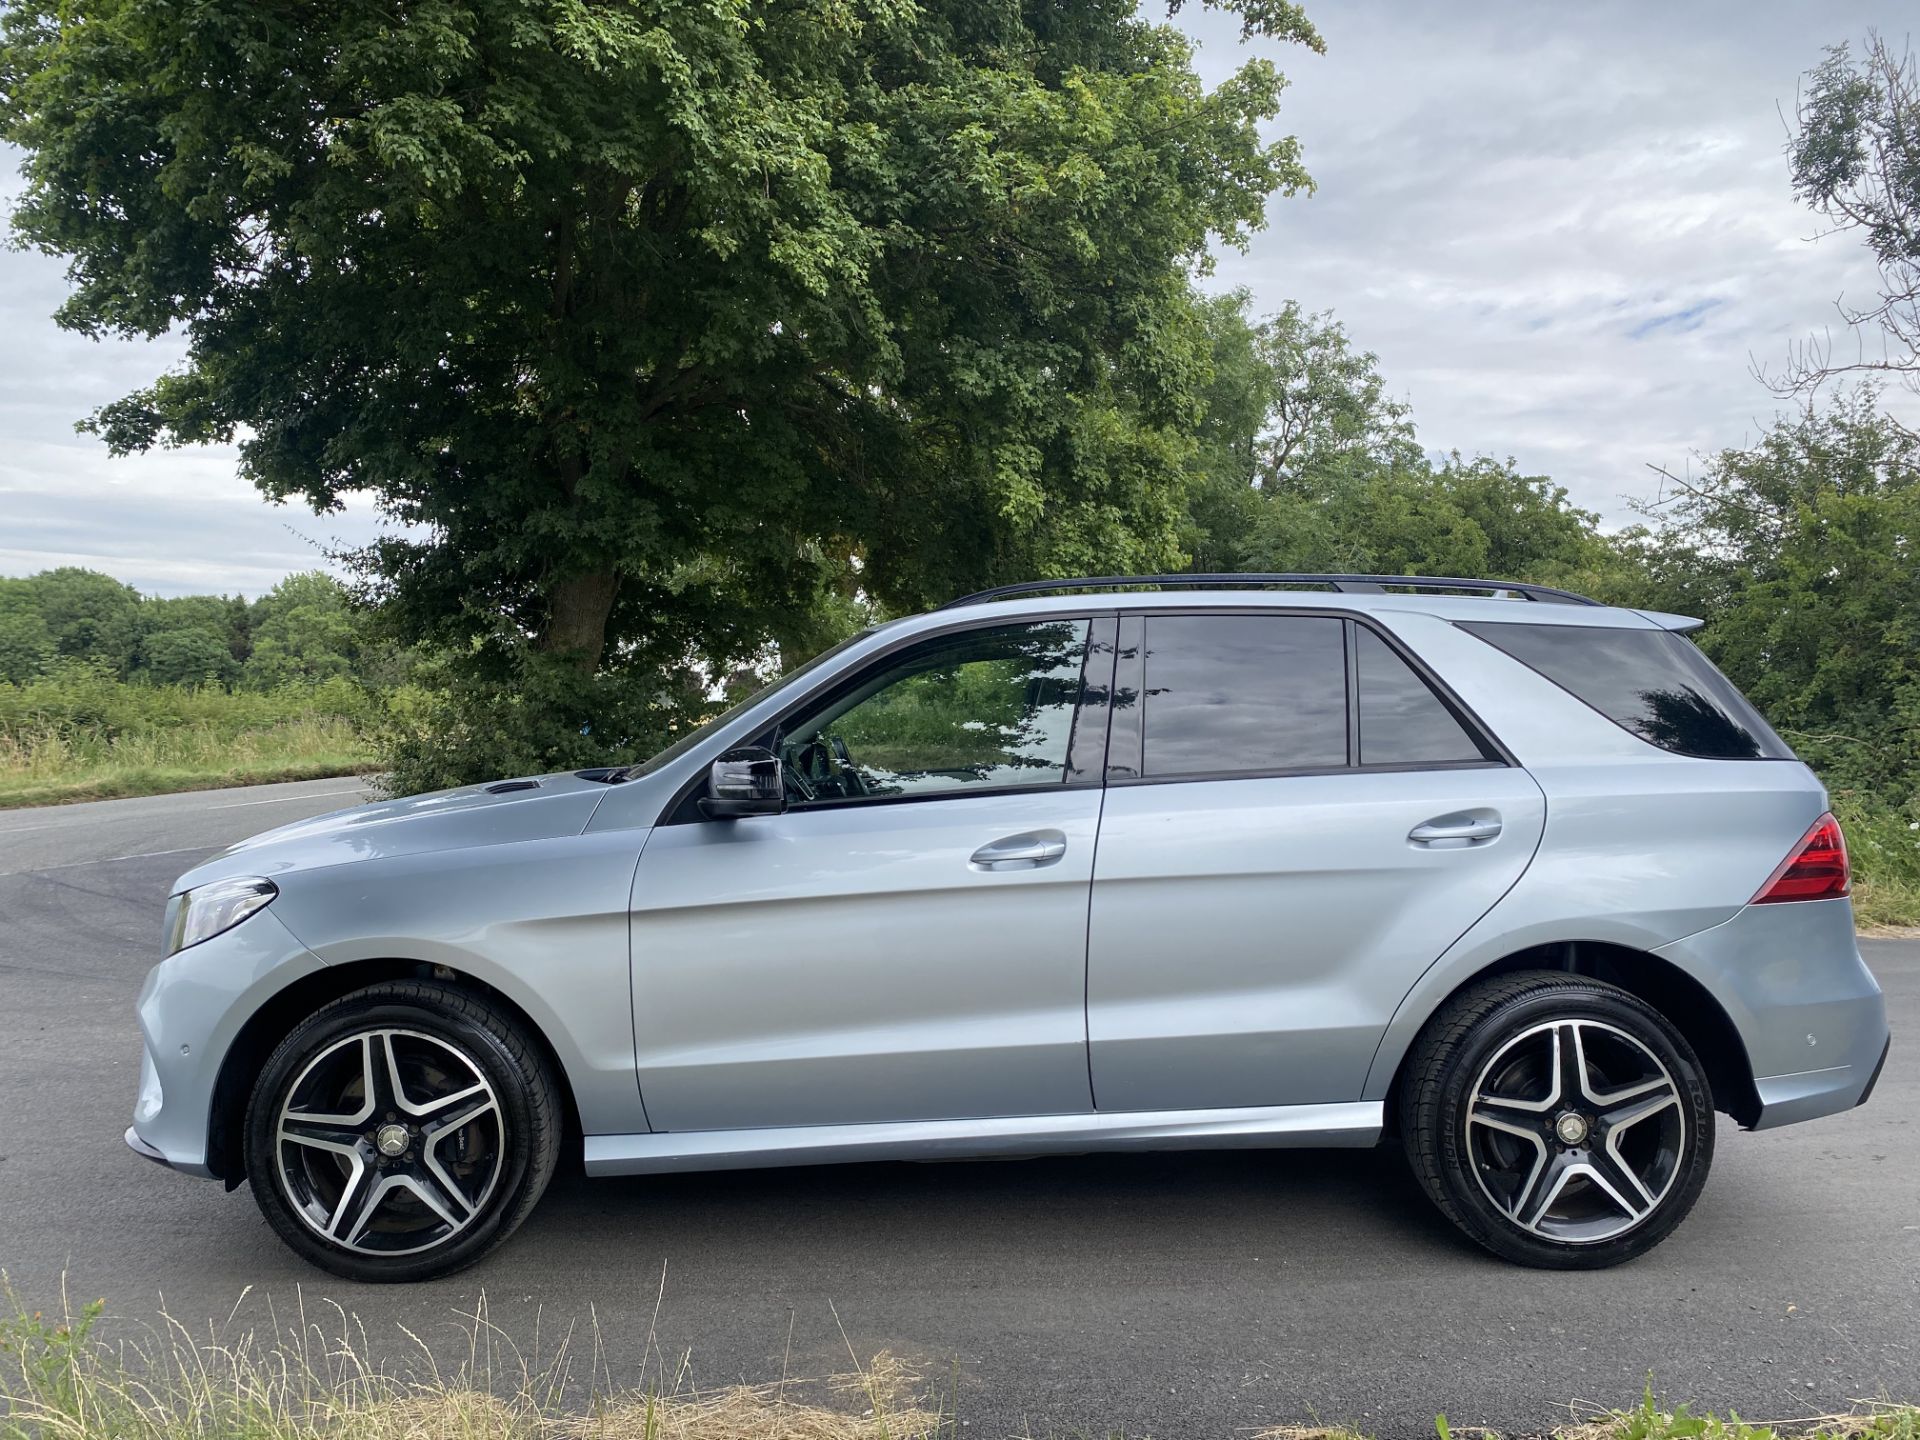 MERCEDES GLE 250d "AMG LINE NIGHT EDITION" 4 MATIC 7G AUTO (17REG) GREAT SPEC *NO VAT - SAVE 20%" - Image 6 of 36